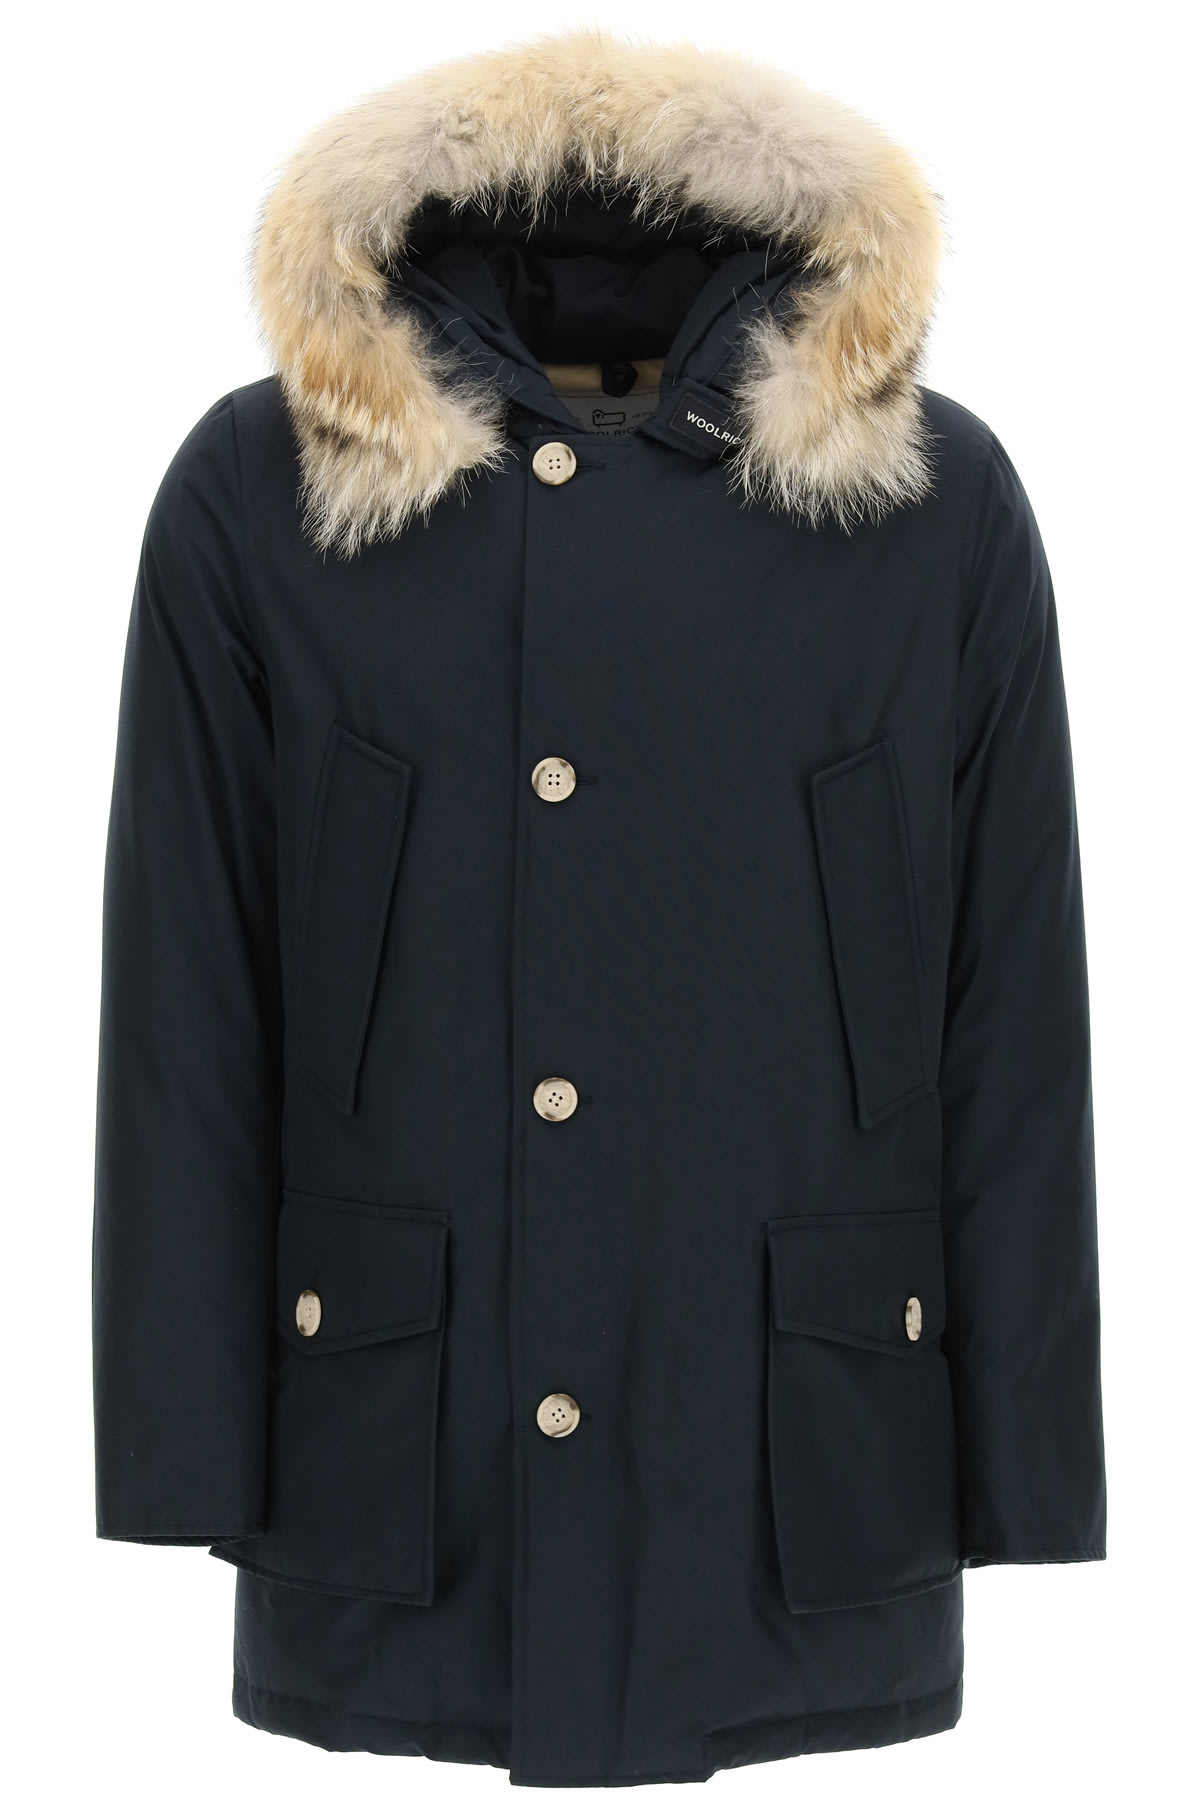 Woolrich Artic Df Parka With Coyote Fur Woolrich